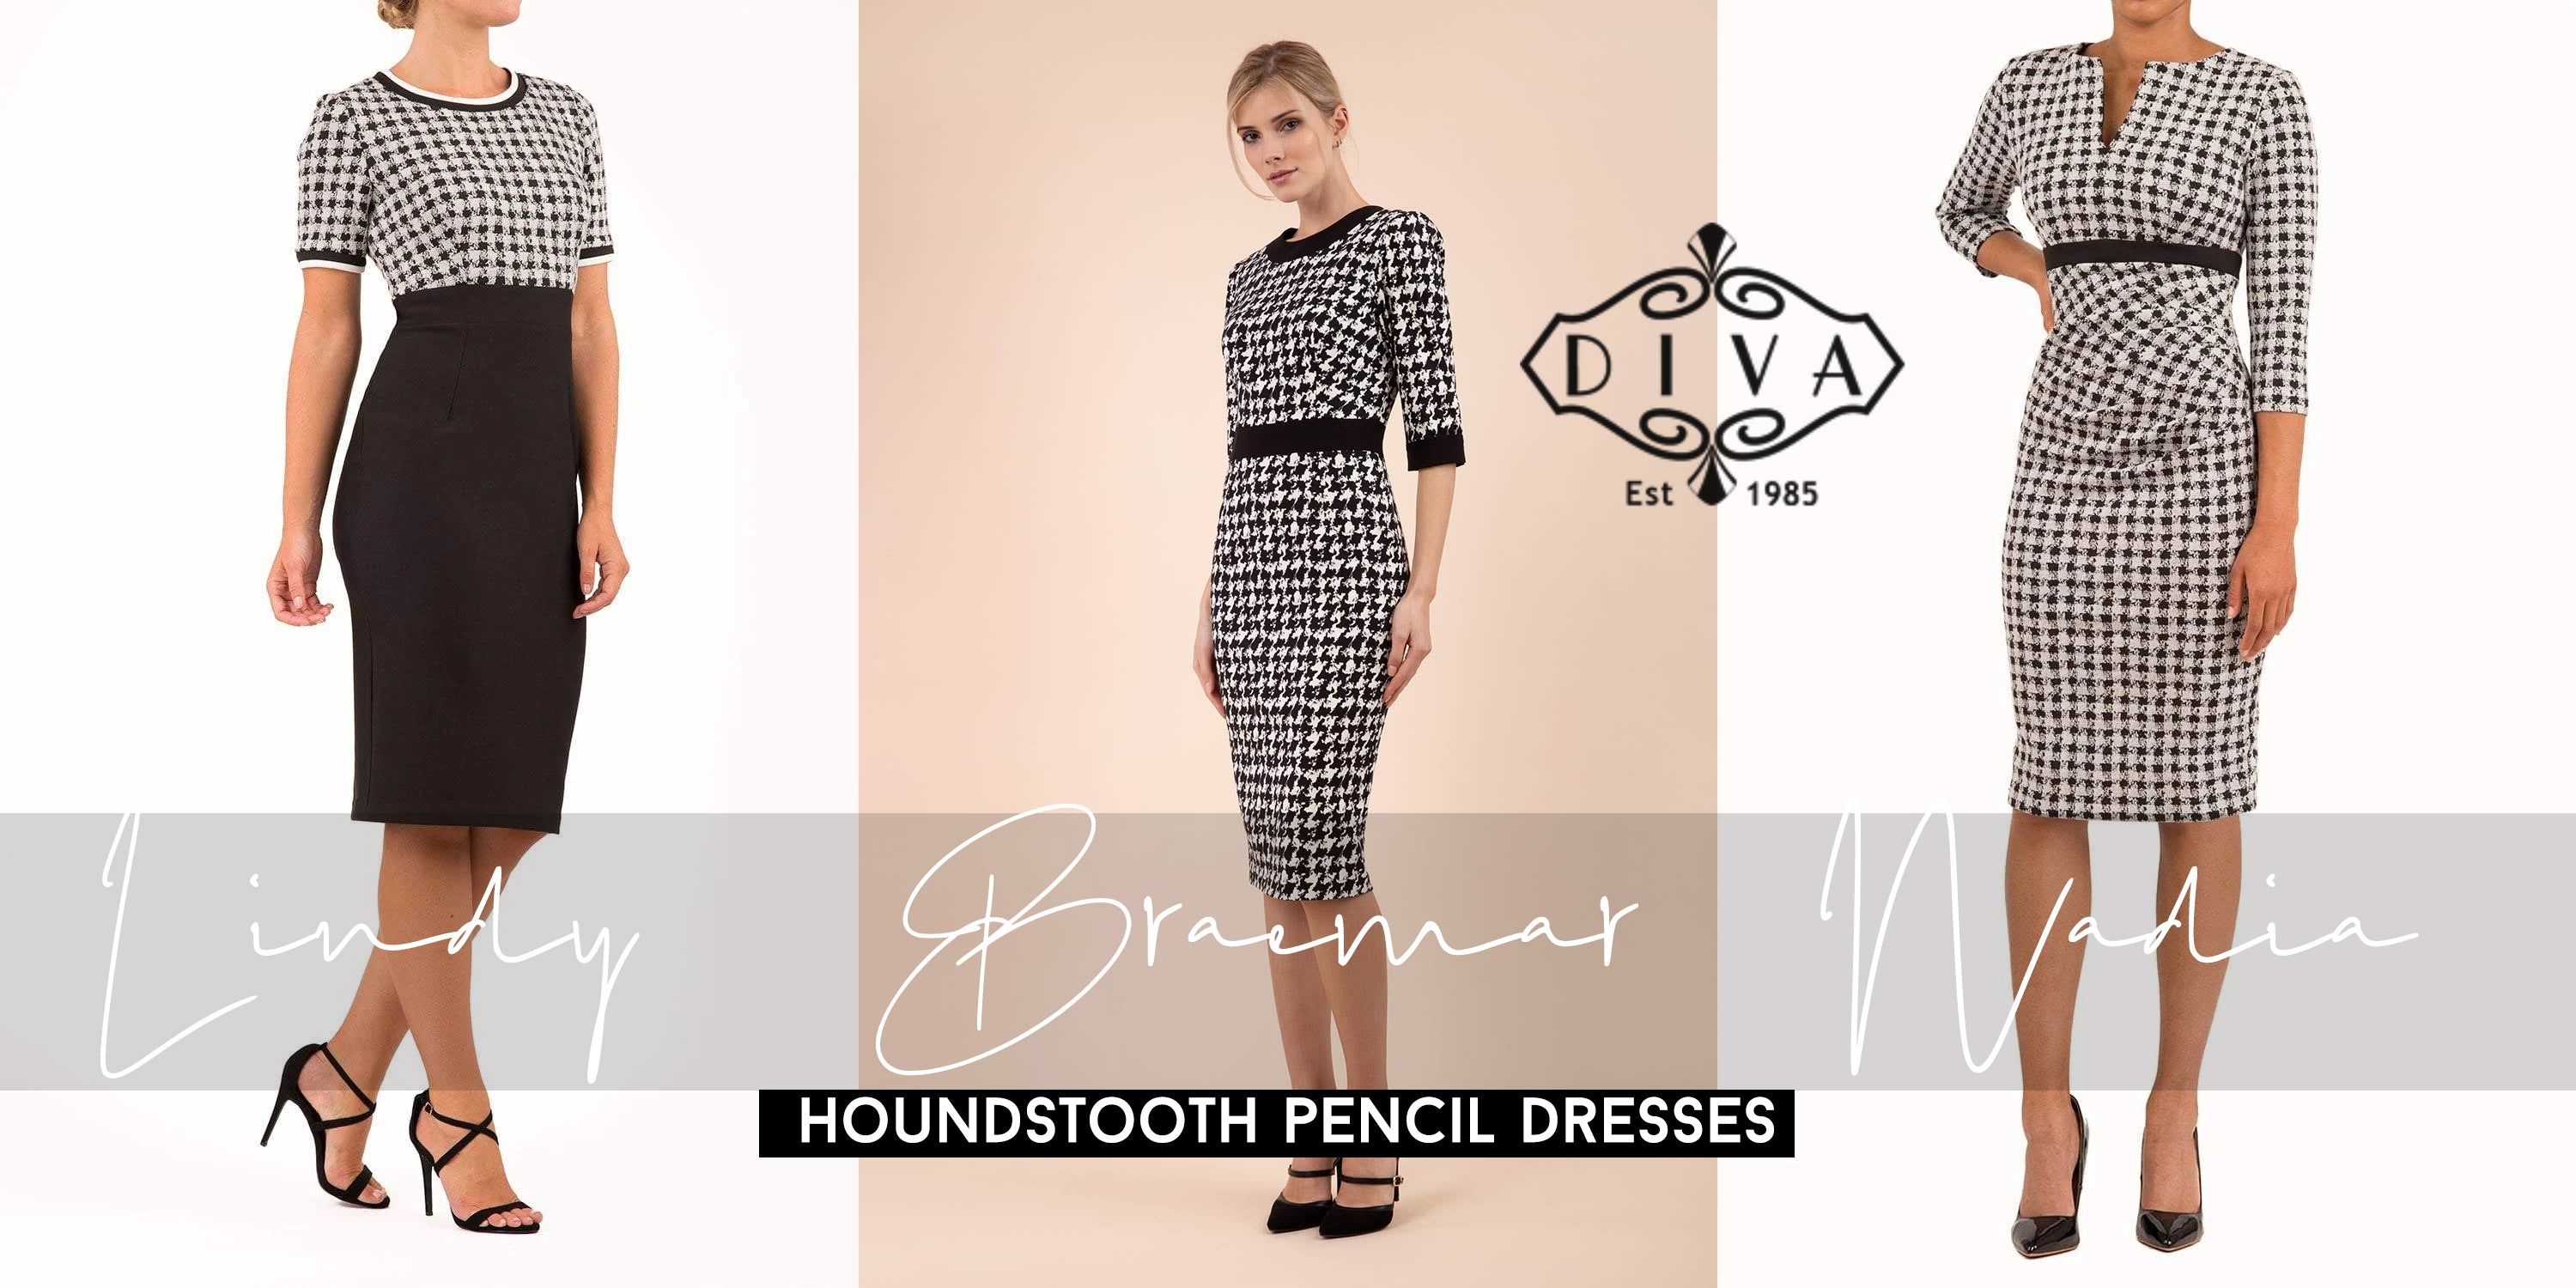 three images of Houndstooth dresses, each designed and sold by Diva Catwalk - with wording stating the name of each dress.